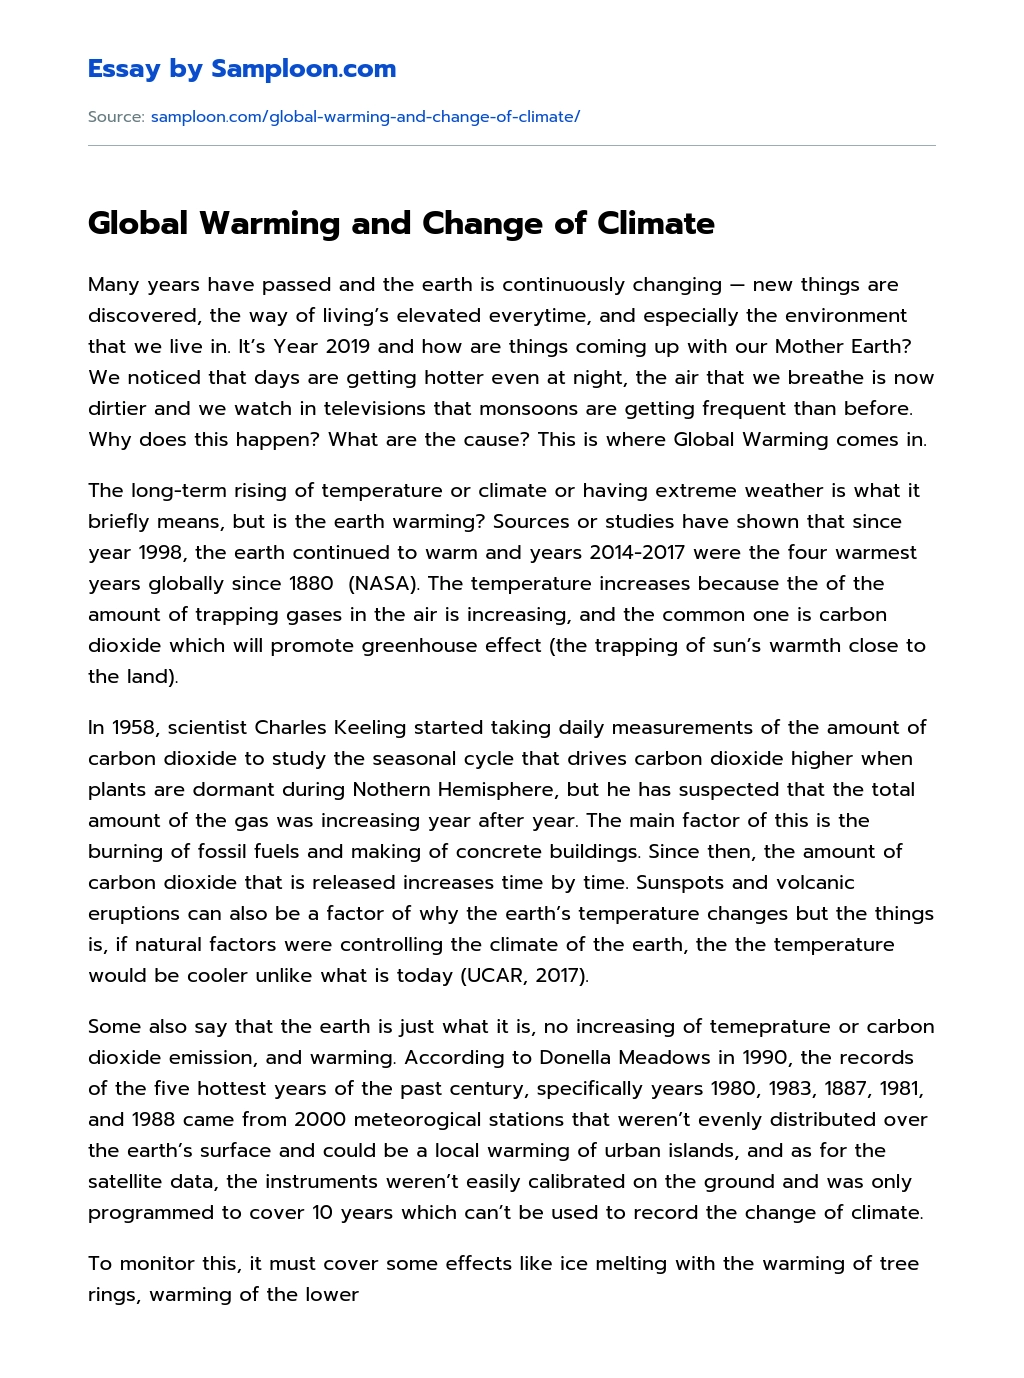 Global Warming and Change of Climate essay